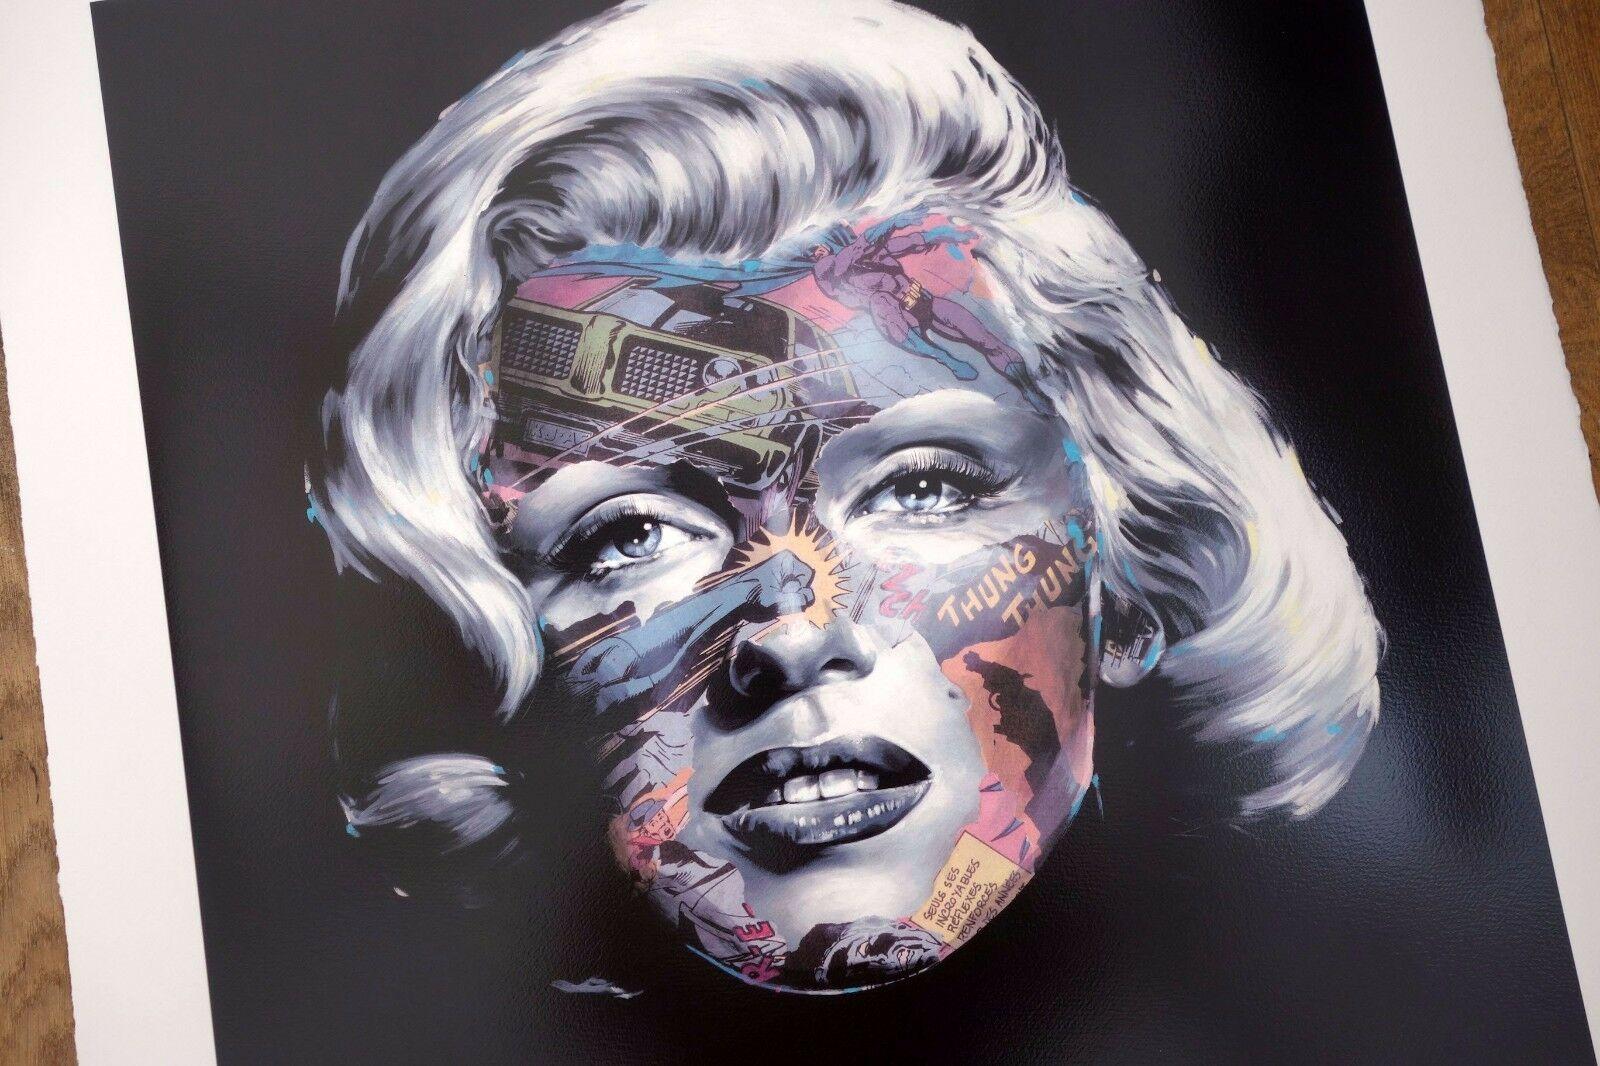 By Sandra Chevrier
LA CAGE À LA TOUTE DERNIÈRE SECONDE
and
LA CAGE ET TOUT CE QUE JE SUIS

Inspired by Marilyn Monroe

(x2) 24-colour screen prints on 330 gsm Somerset paper
Signed and numbered by the artist
Edition of 125
29 1/8 x 30 5/8 in (74 x